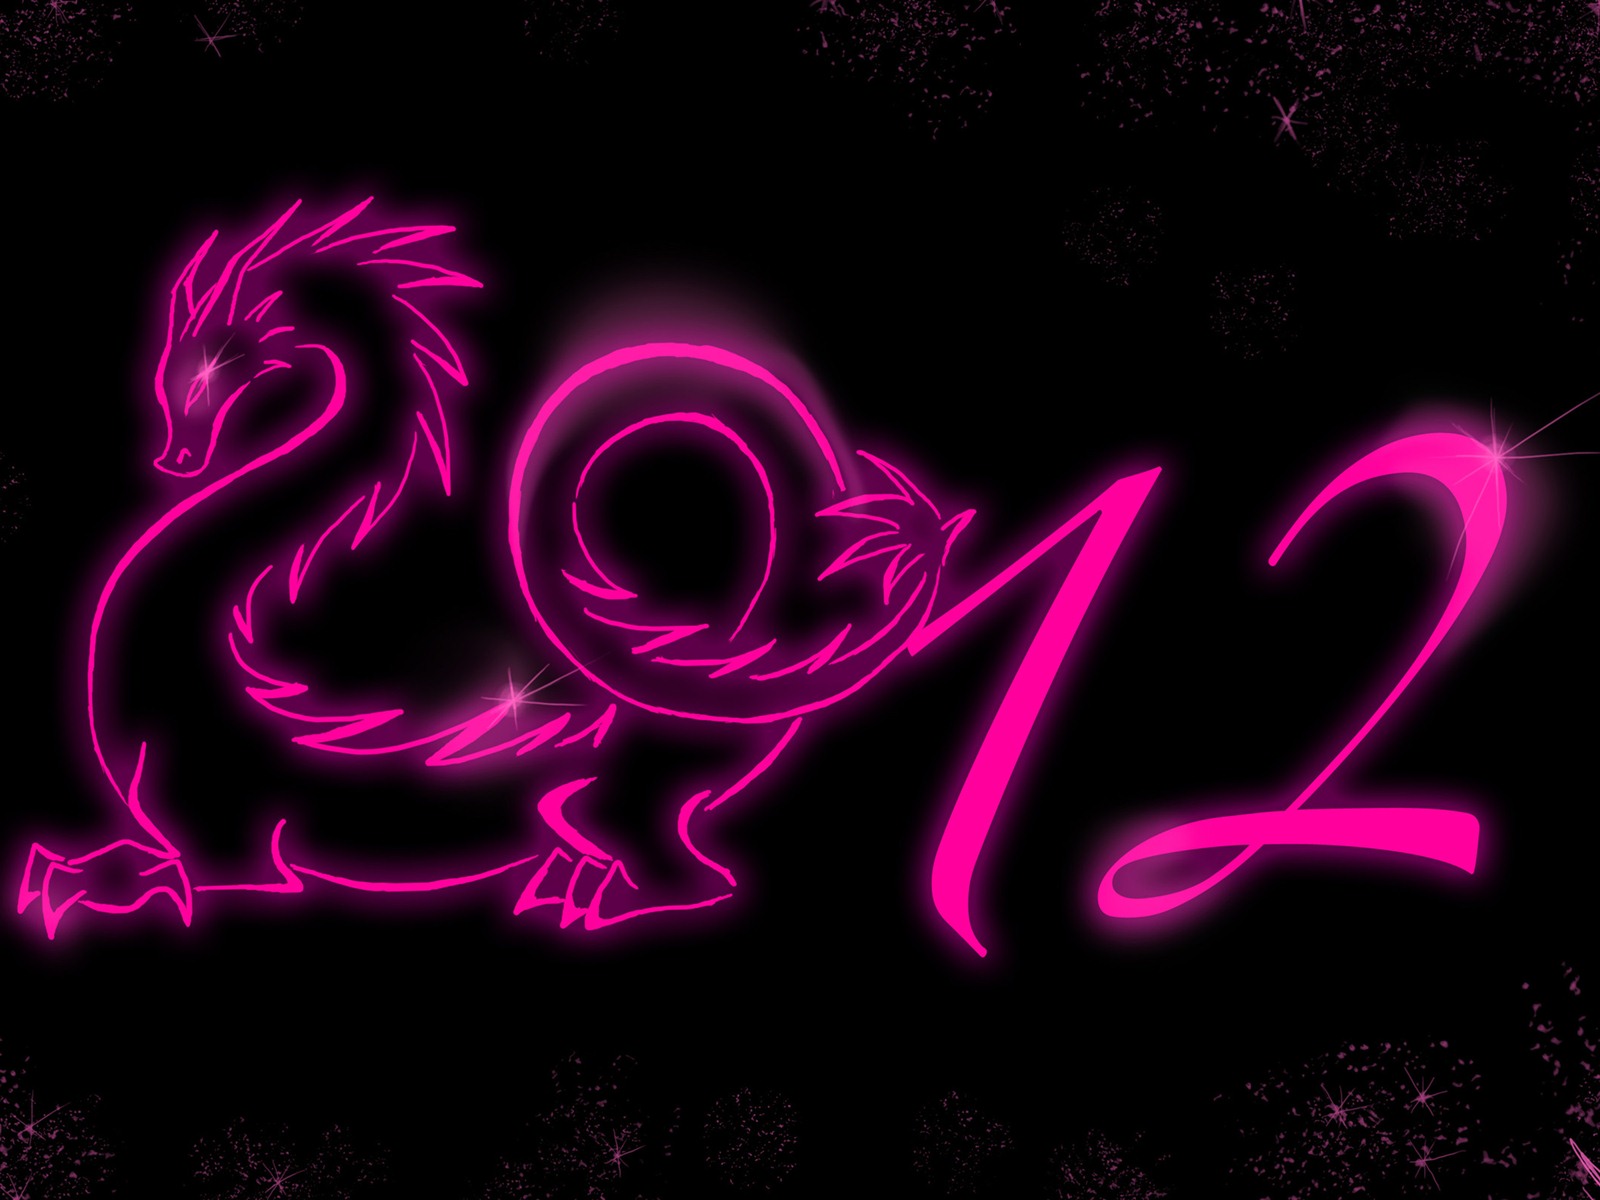 2012 New Year wallpapers (1) #16 - 1600x1200